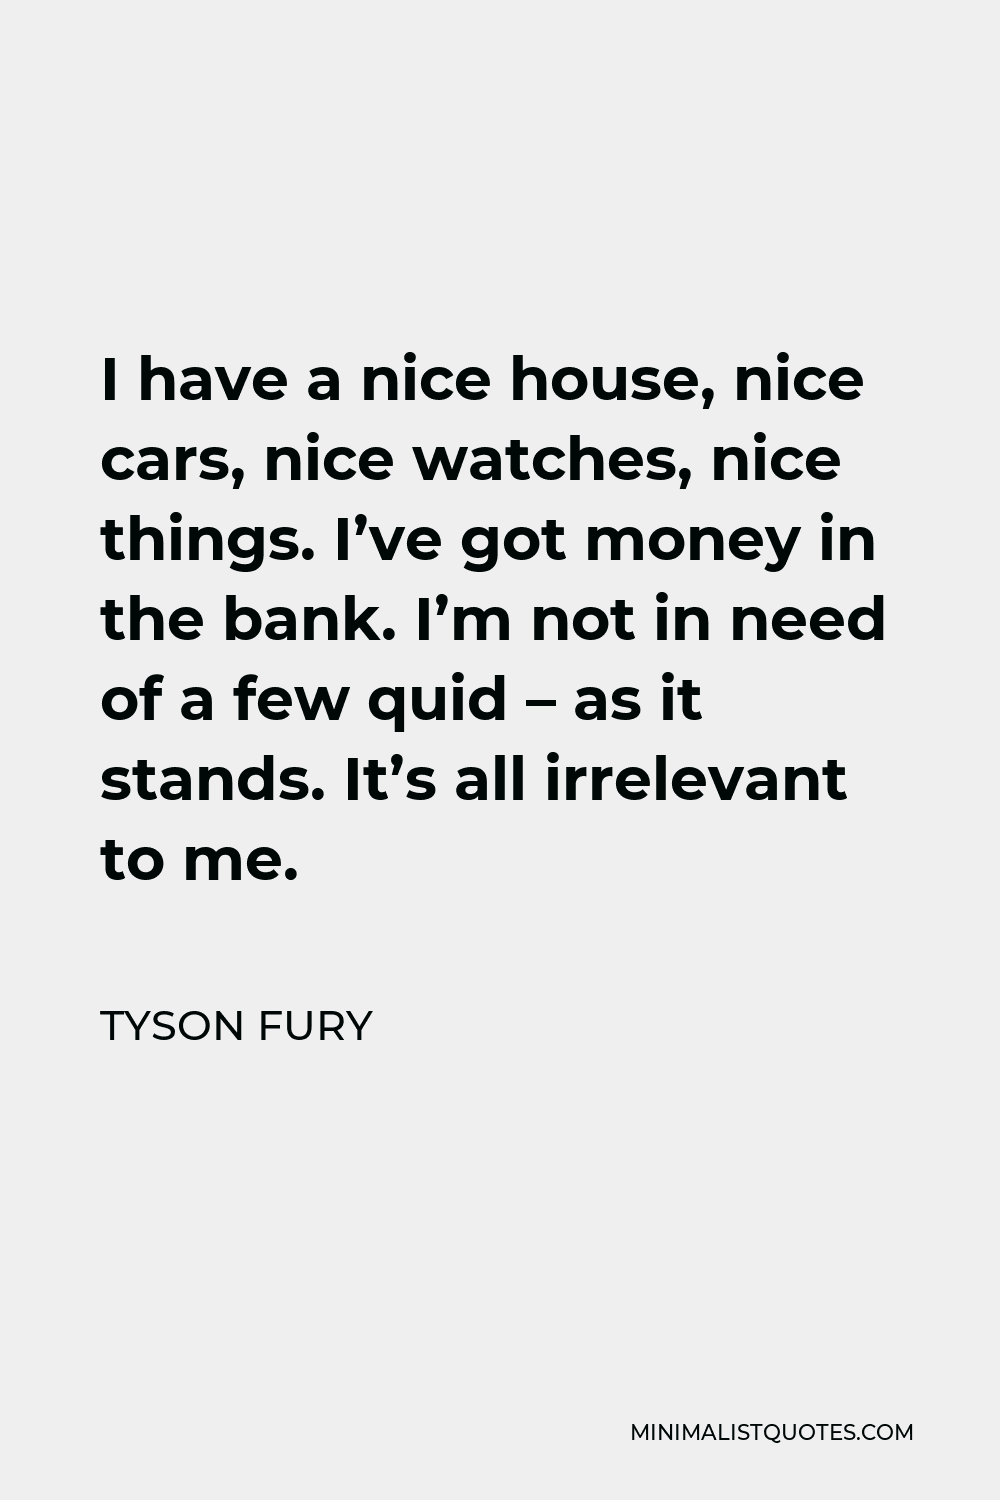 Tyson Fury Quote - I have a nice house, nice cars, nice watches, nice things. I’ve got money in the bank. I’m not in need of a few quid – as it stands. It’s all irrelevant to me.